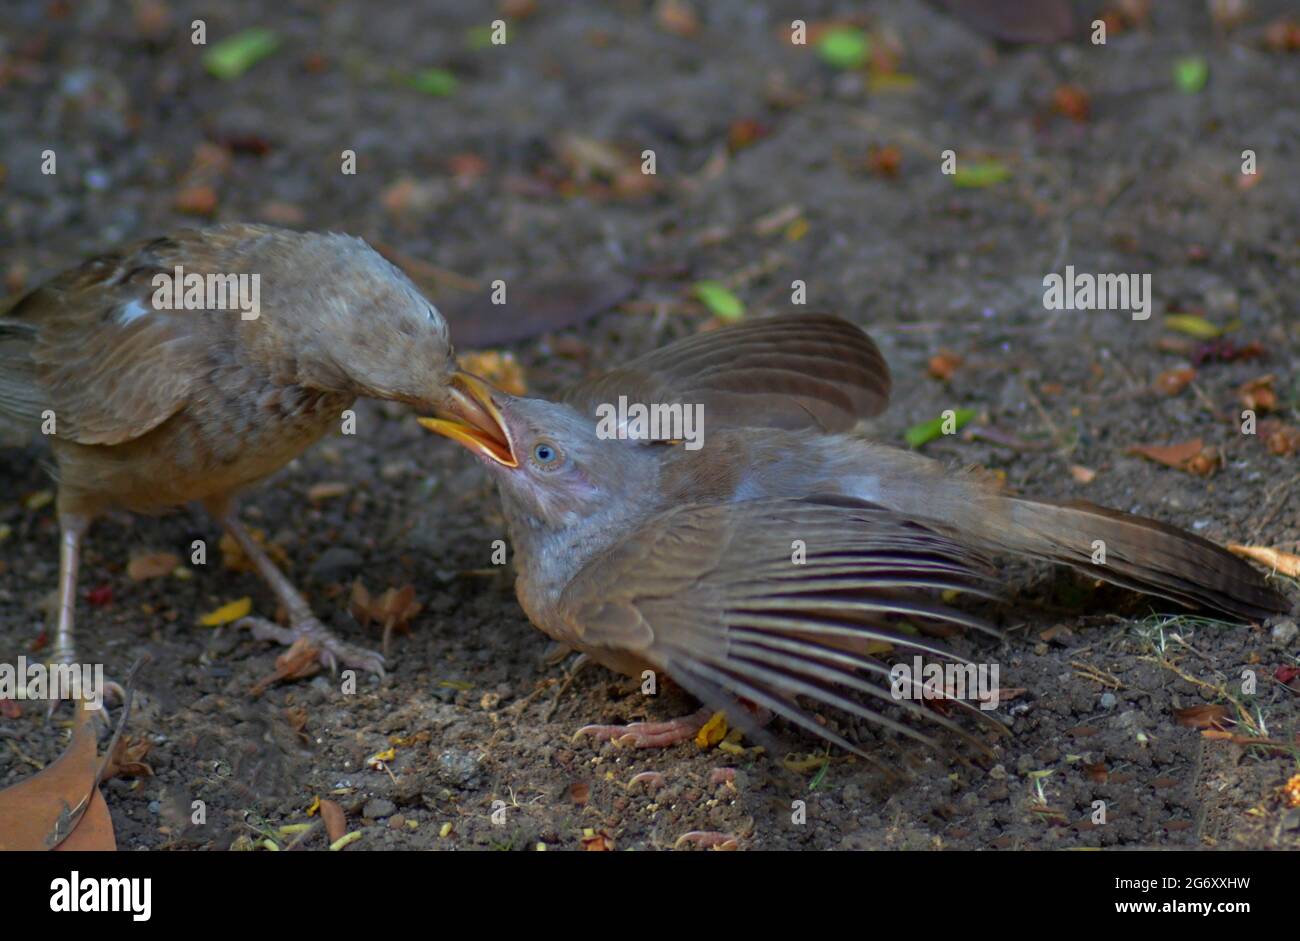 Mother babbler feeding the baby yellow-billed babbler/India Stock Photo